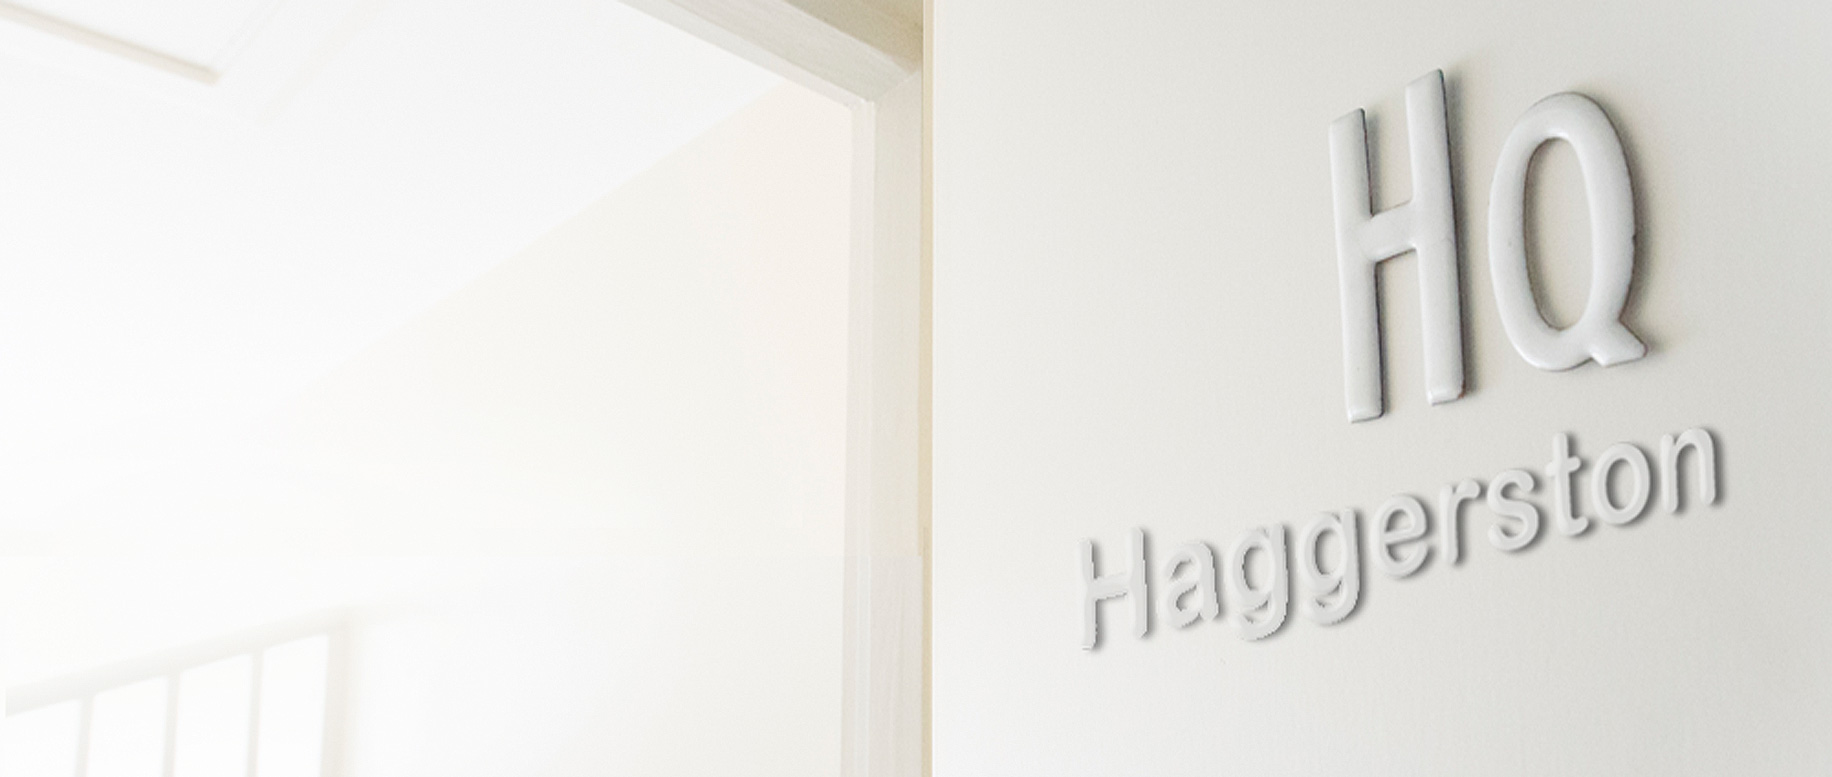 Our Rooms Haggerston header